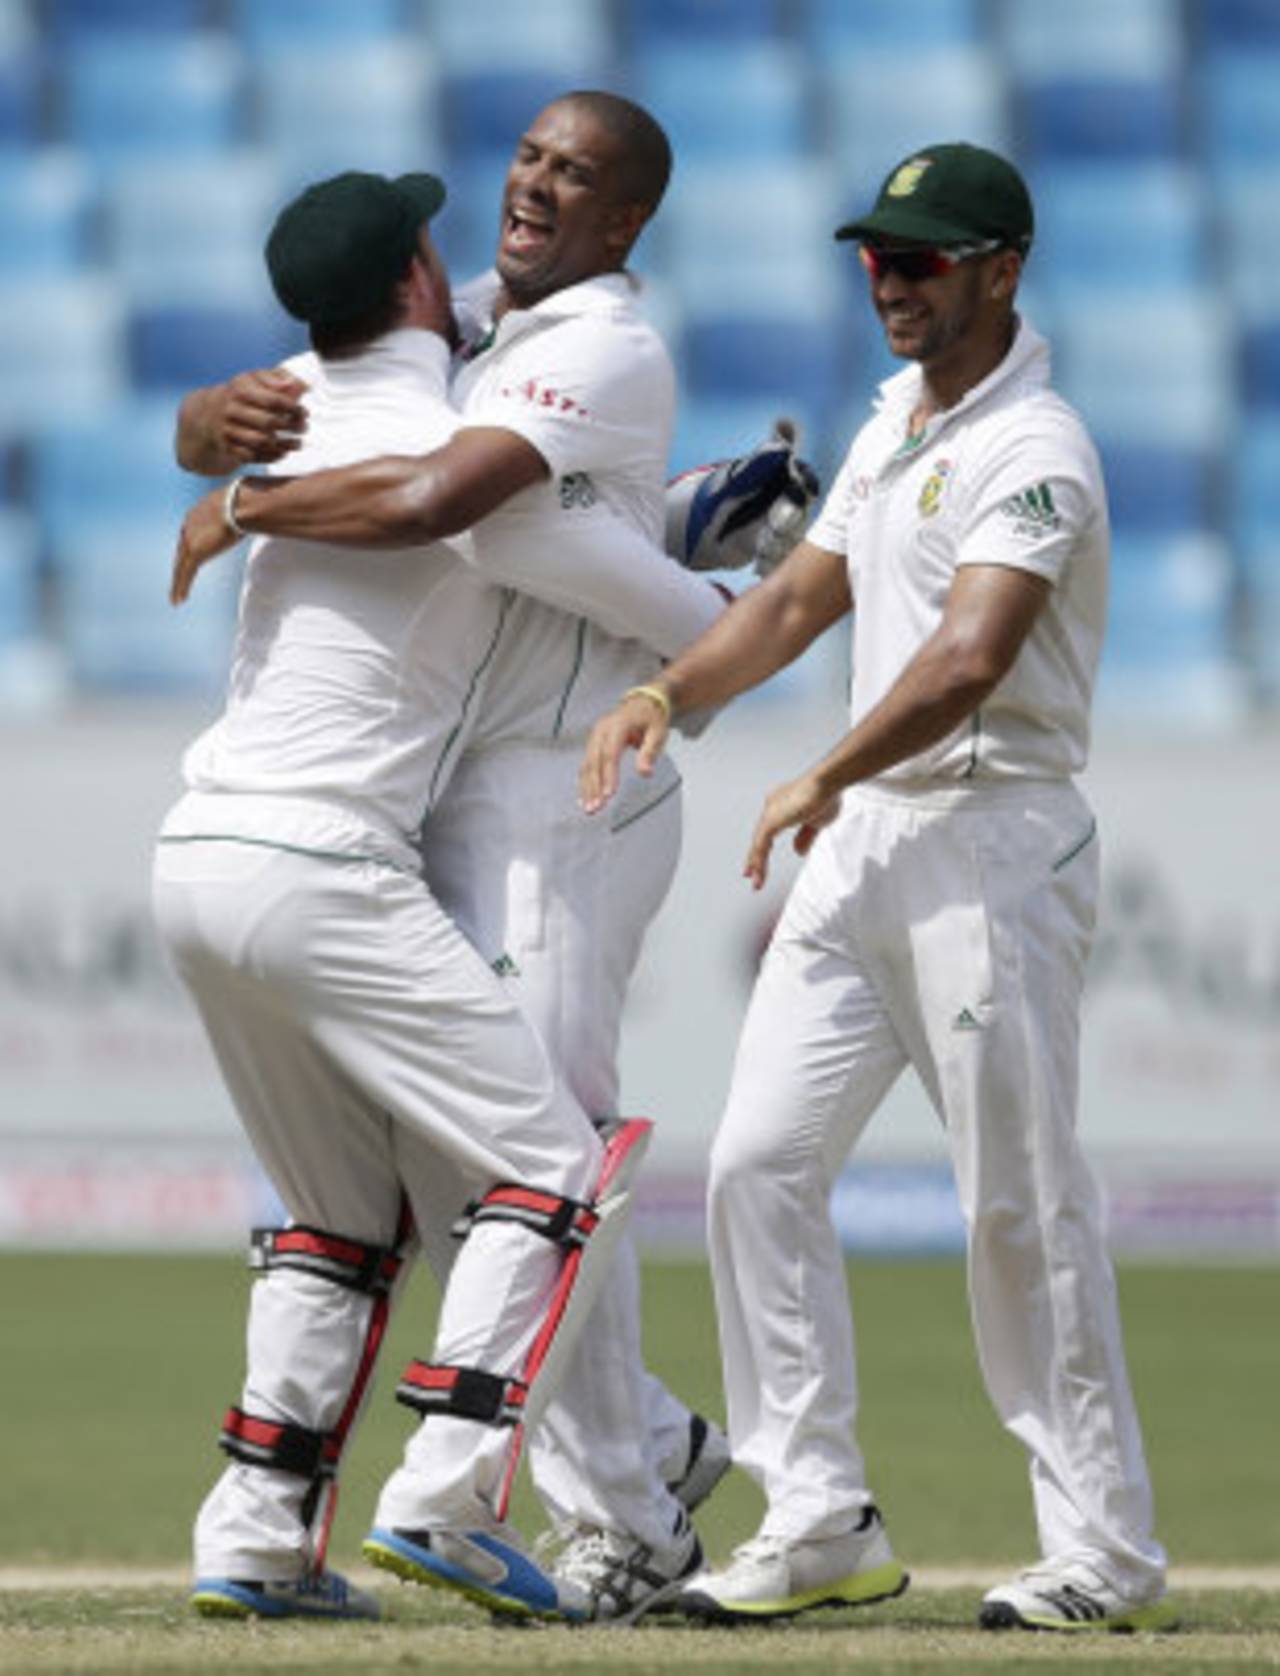 Vernon Philander dismissed Khurram Manzoor in his first over, Pakistan v South Africa, 2nd Test, Dubai, 3rd day, October 25, 2013